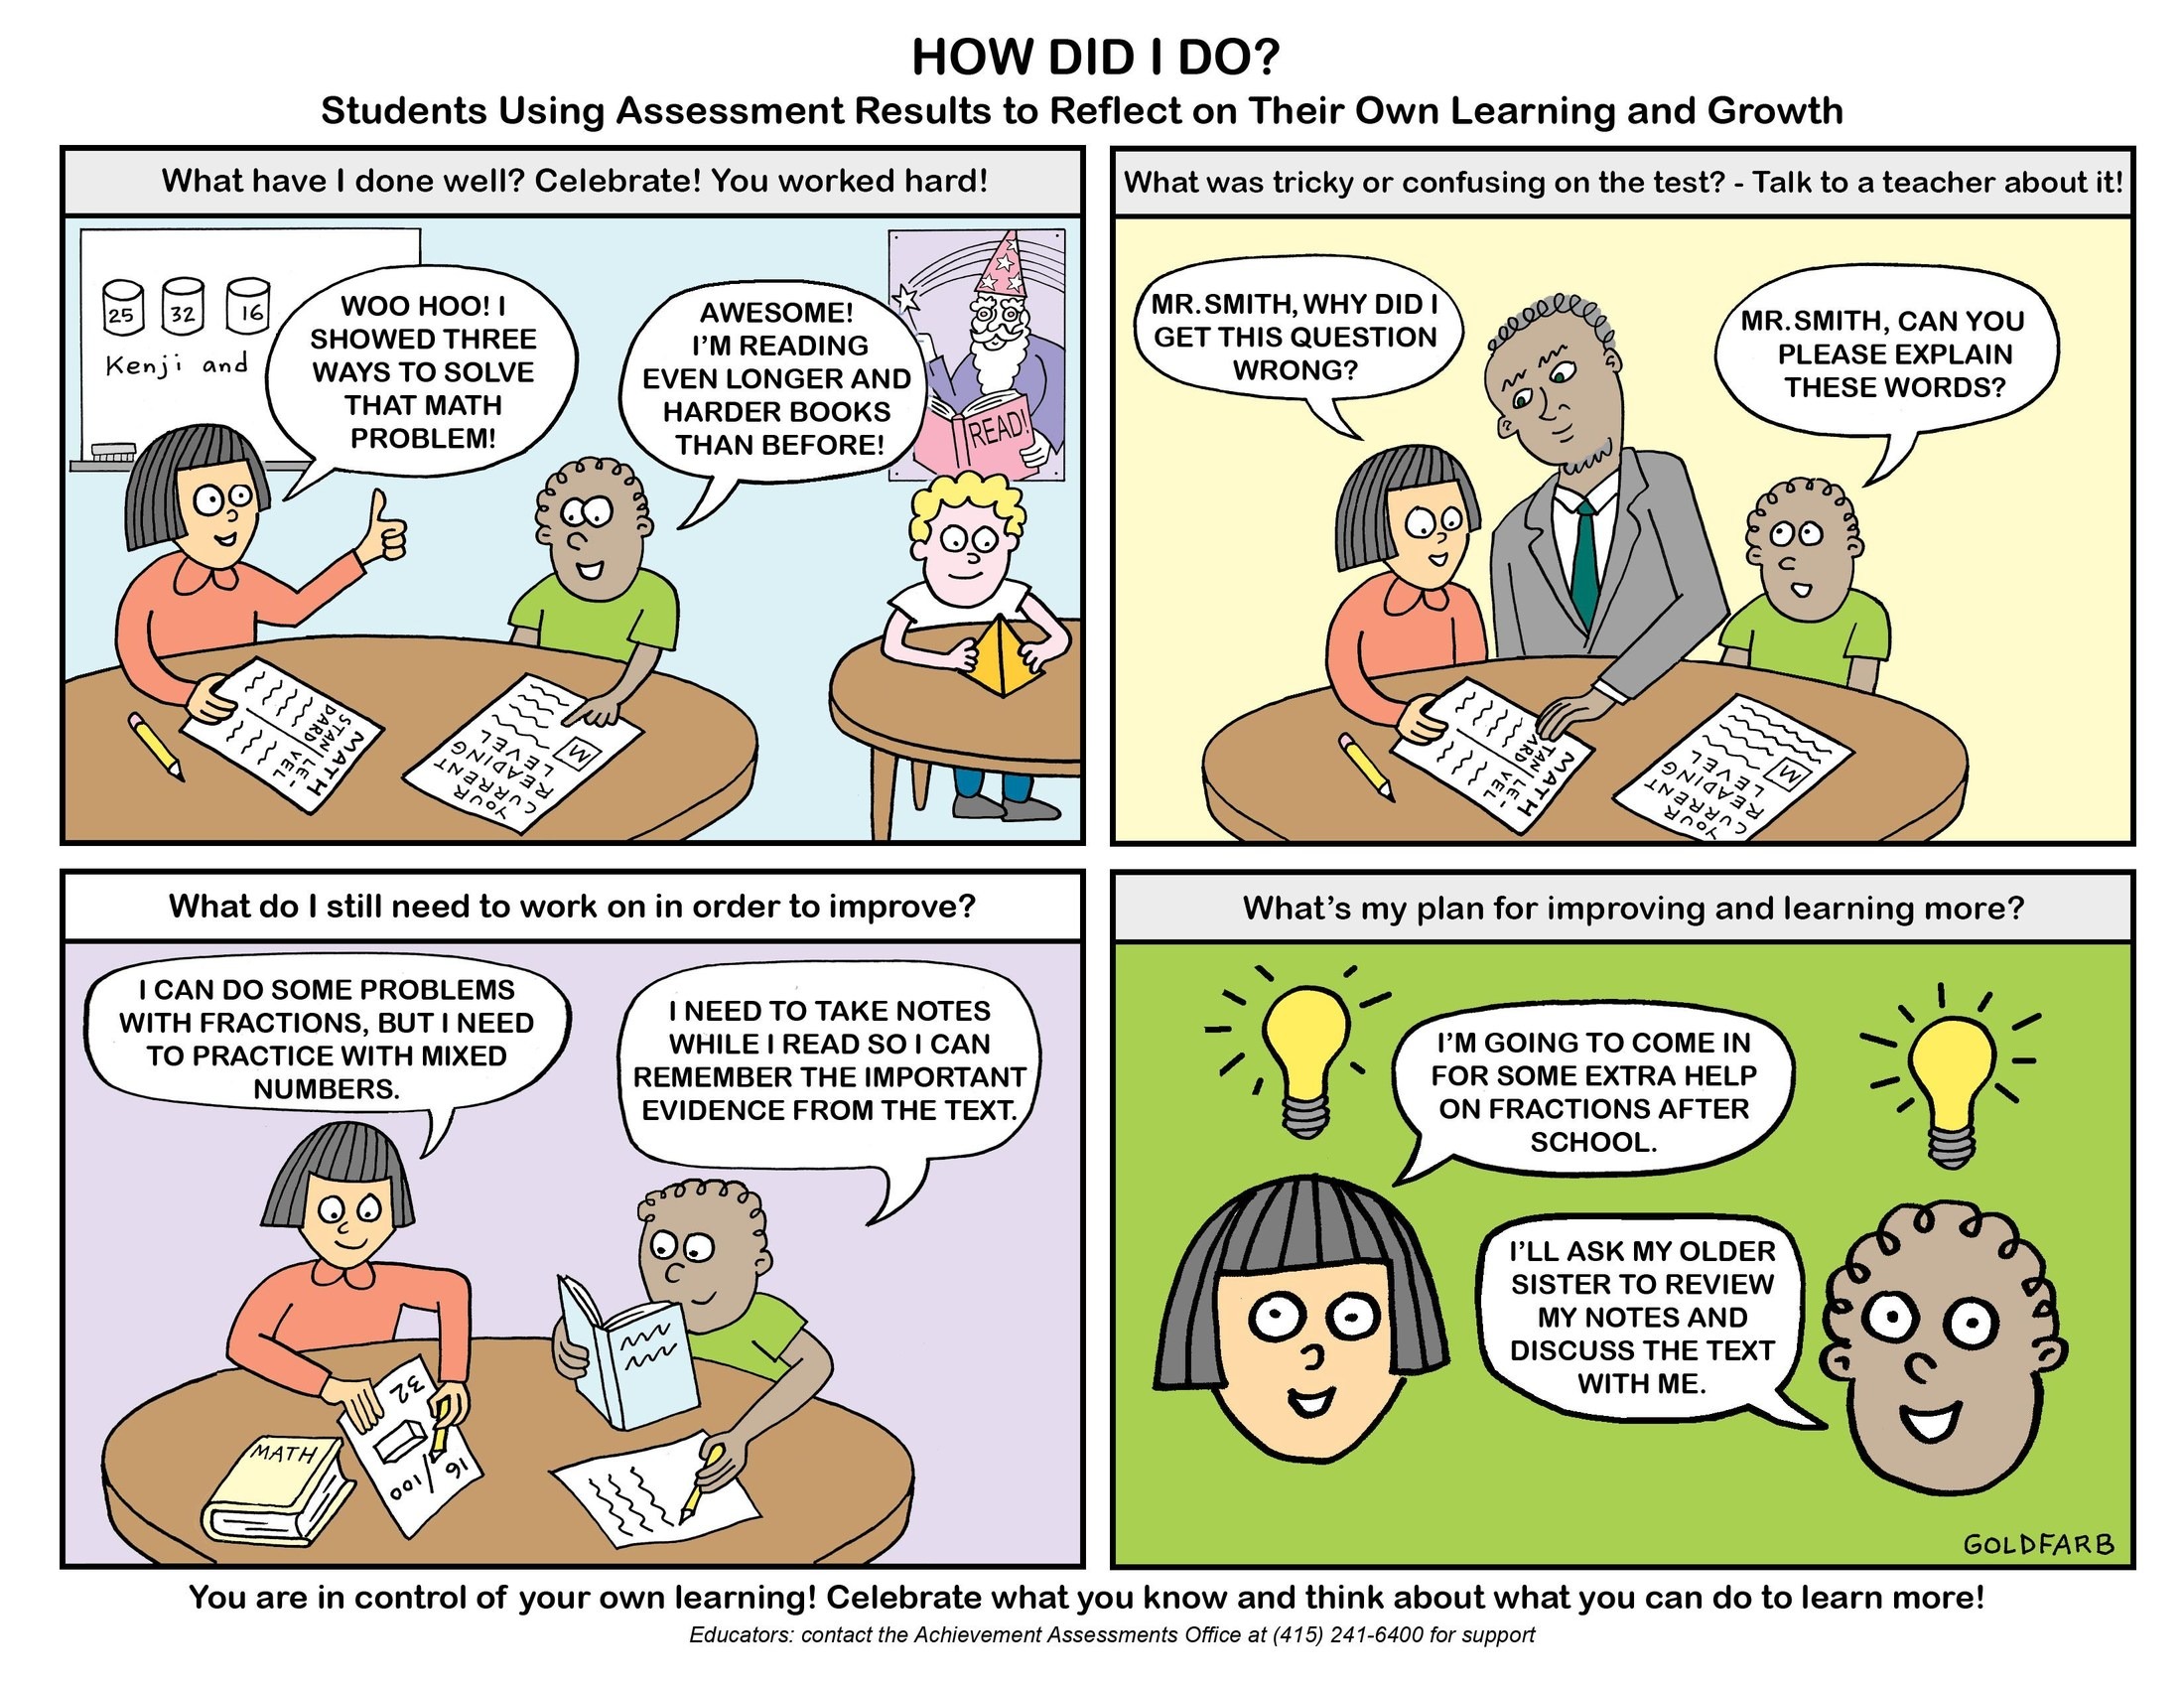 How Did I Do? ( Comic) Students Using Assessment results to Reflect on their own Learning and Growth. waht have I done well? Celebrate! You worked hard! Wohoo! I  showed 3 ways to solve that math problem! Awesome! I'm reading even longer and harder books that before